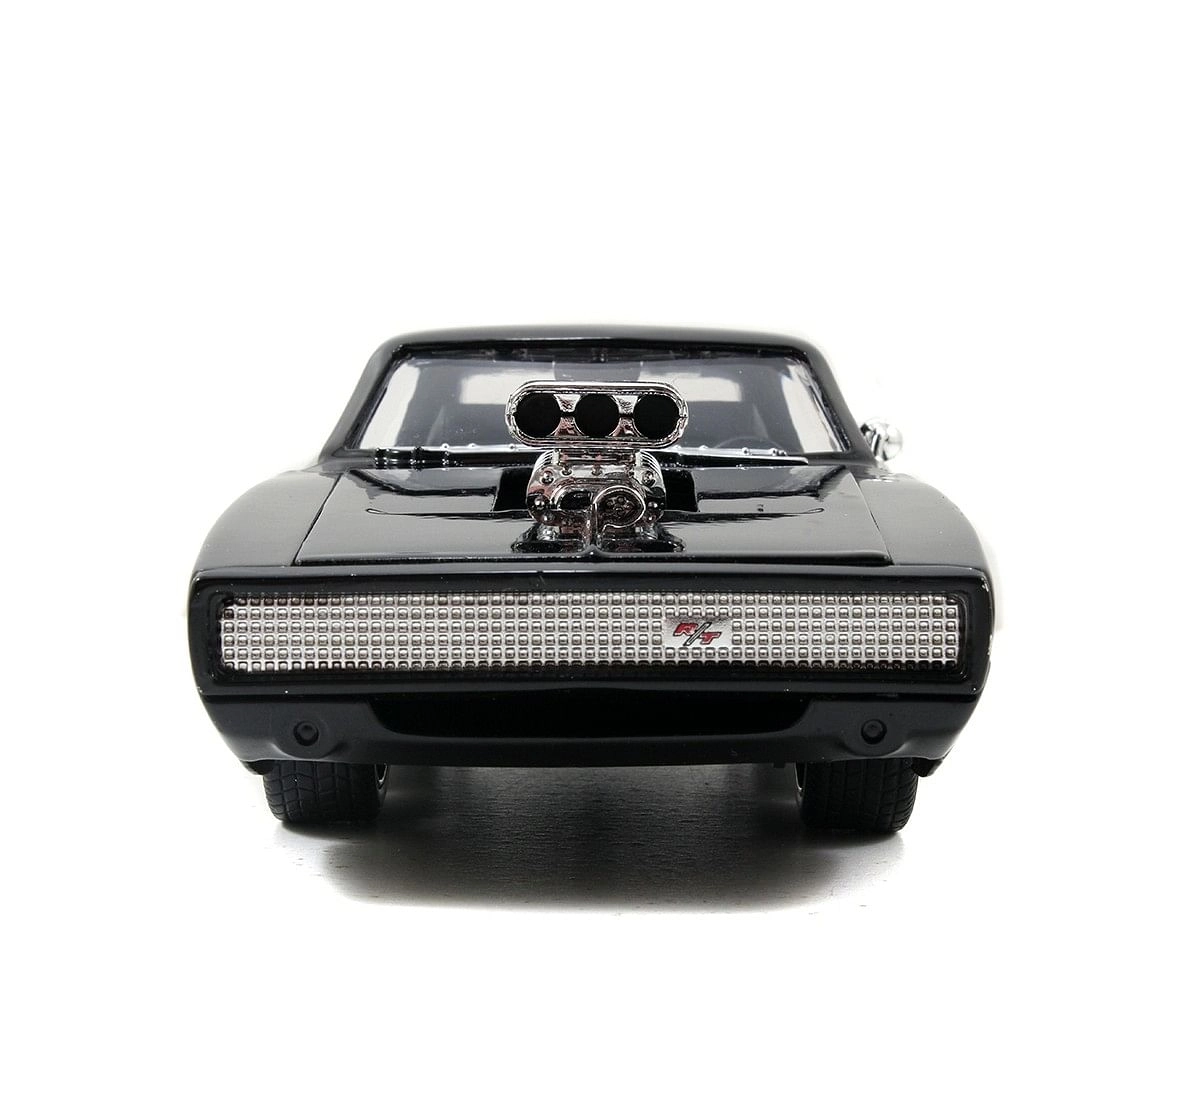 Fast & Furious 1: 24 1970 Dodge Charger (Street) W/Dom Toretto Figur for Kids age 8Y+, Black